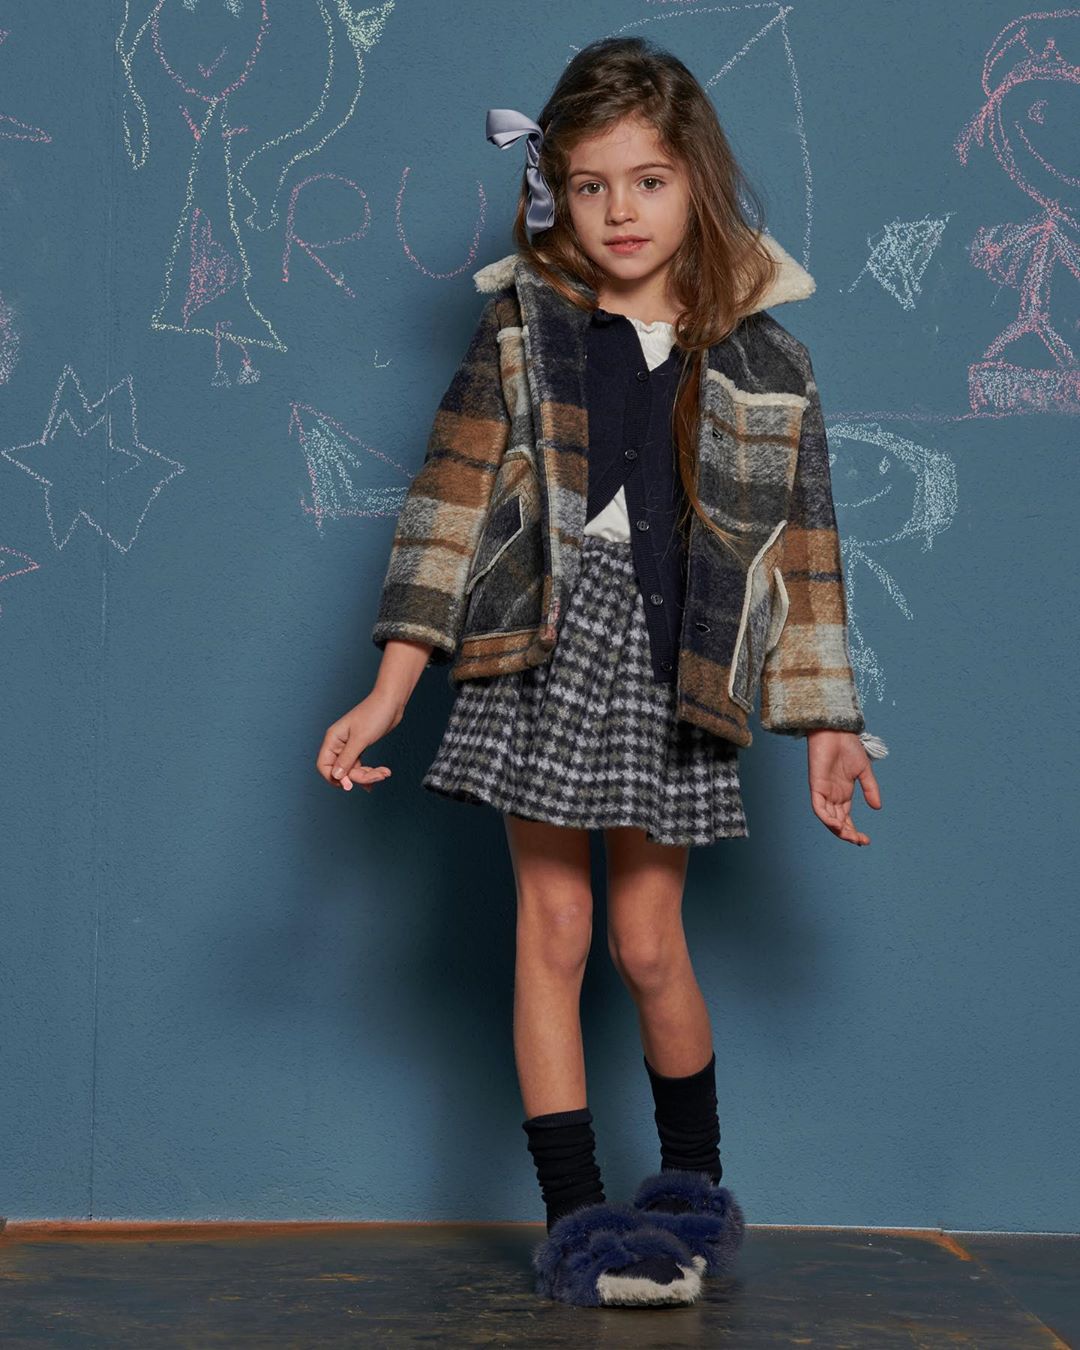 A total look by DouuodKids…